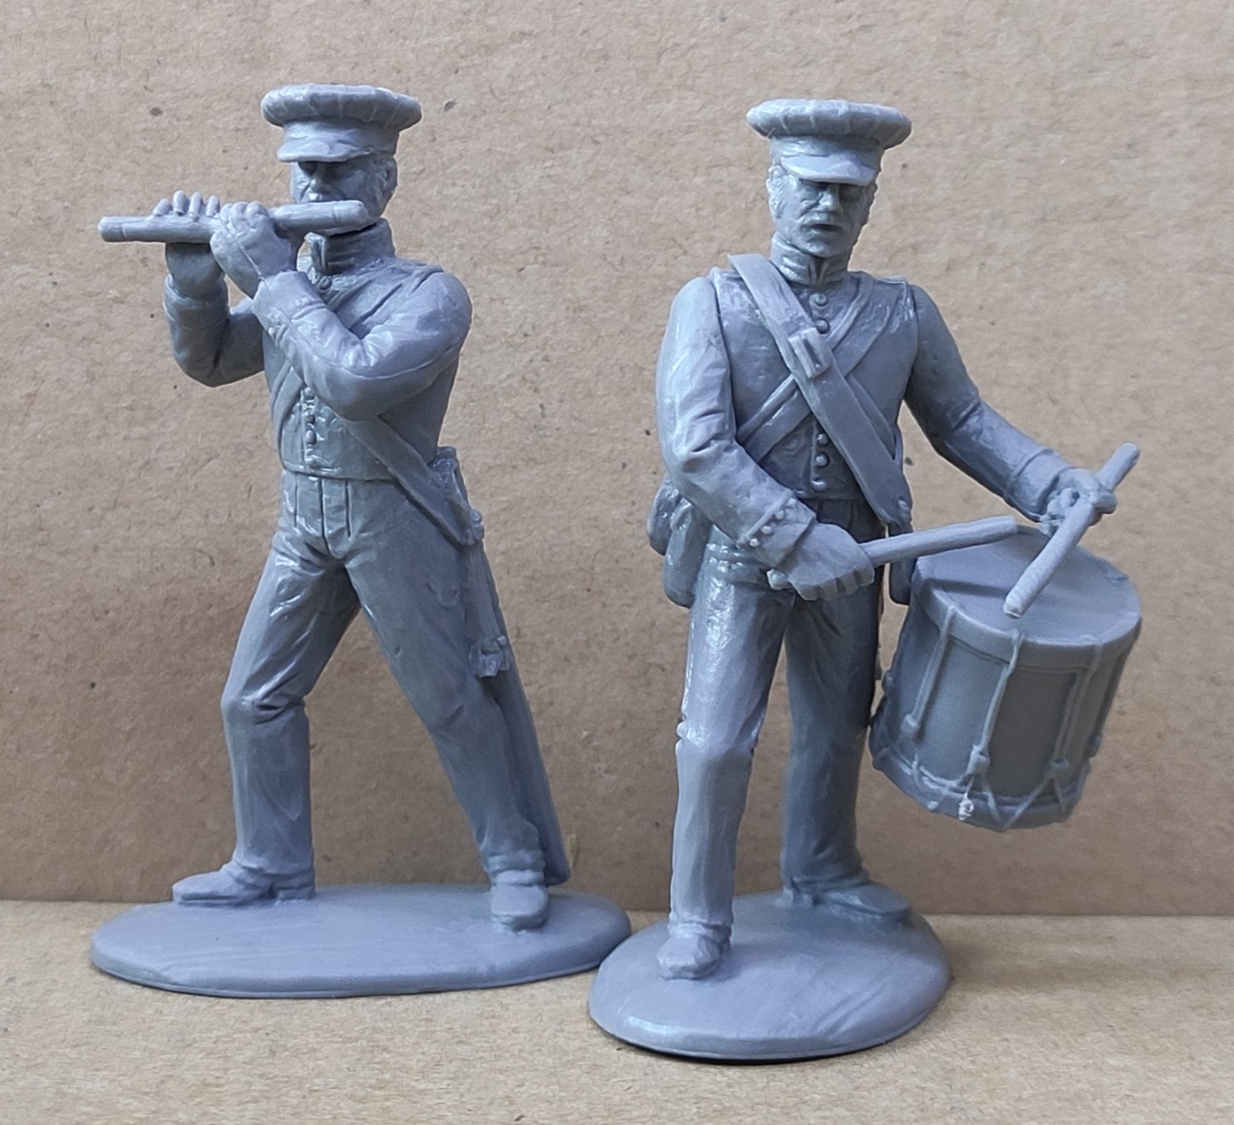 54mm Soldiers at Alamo